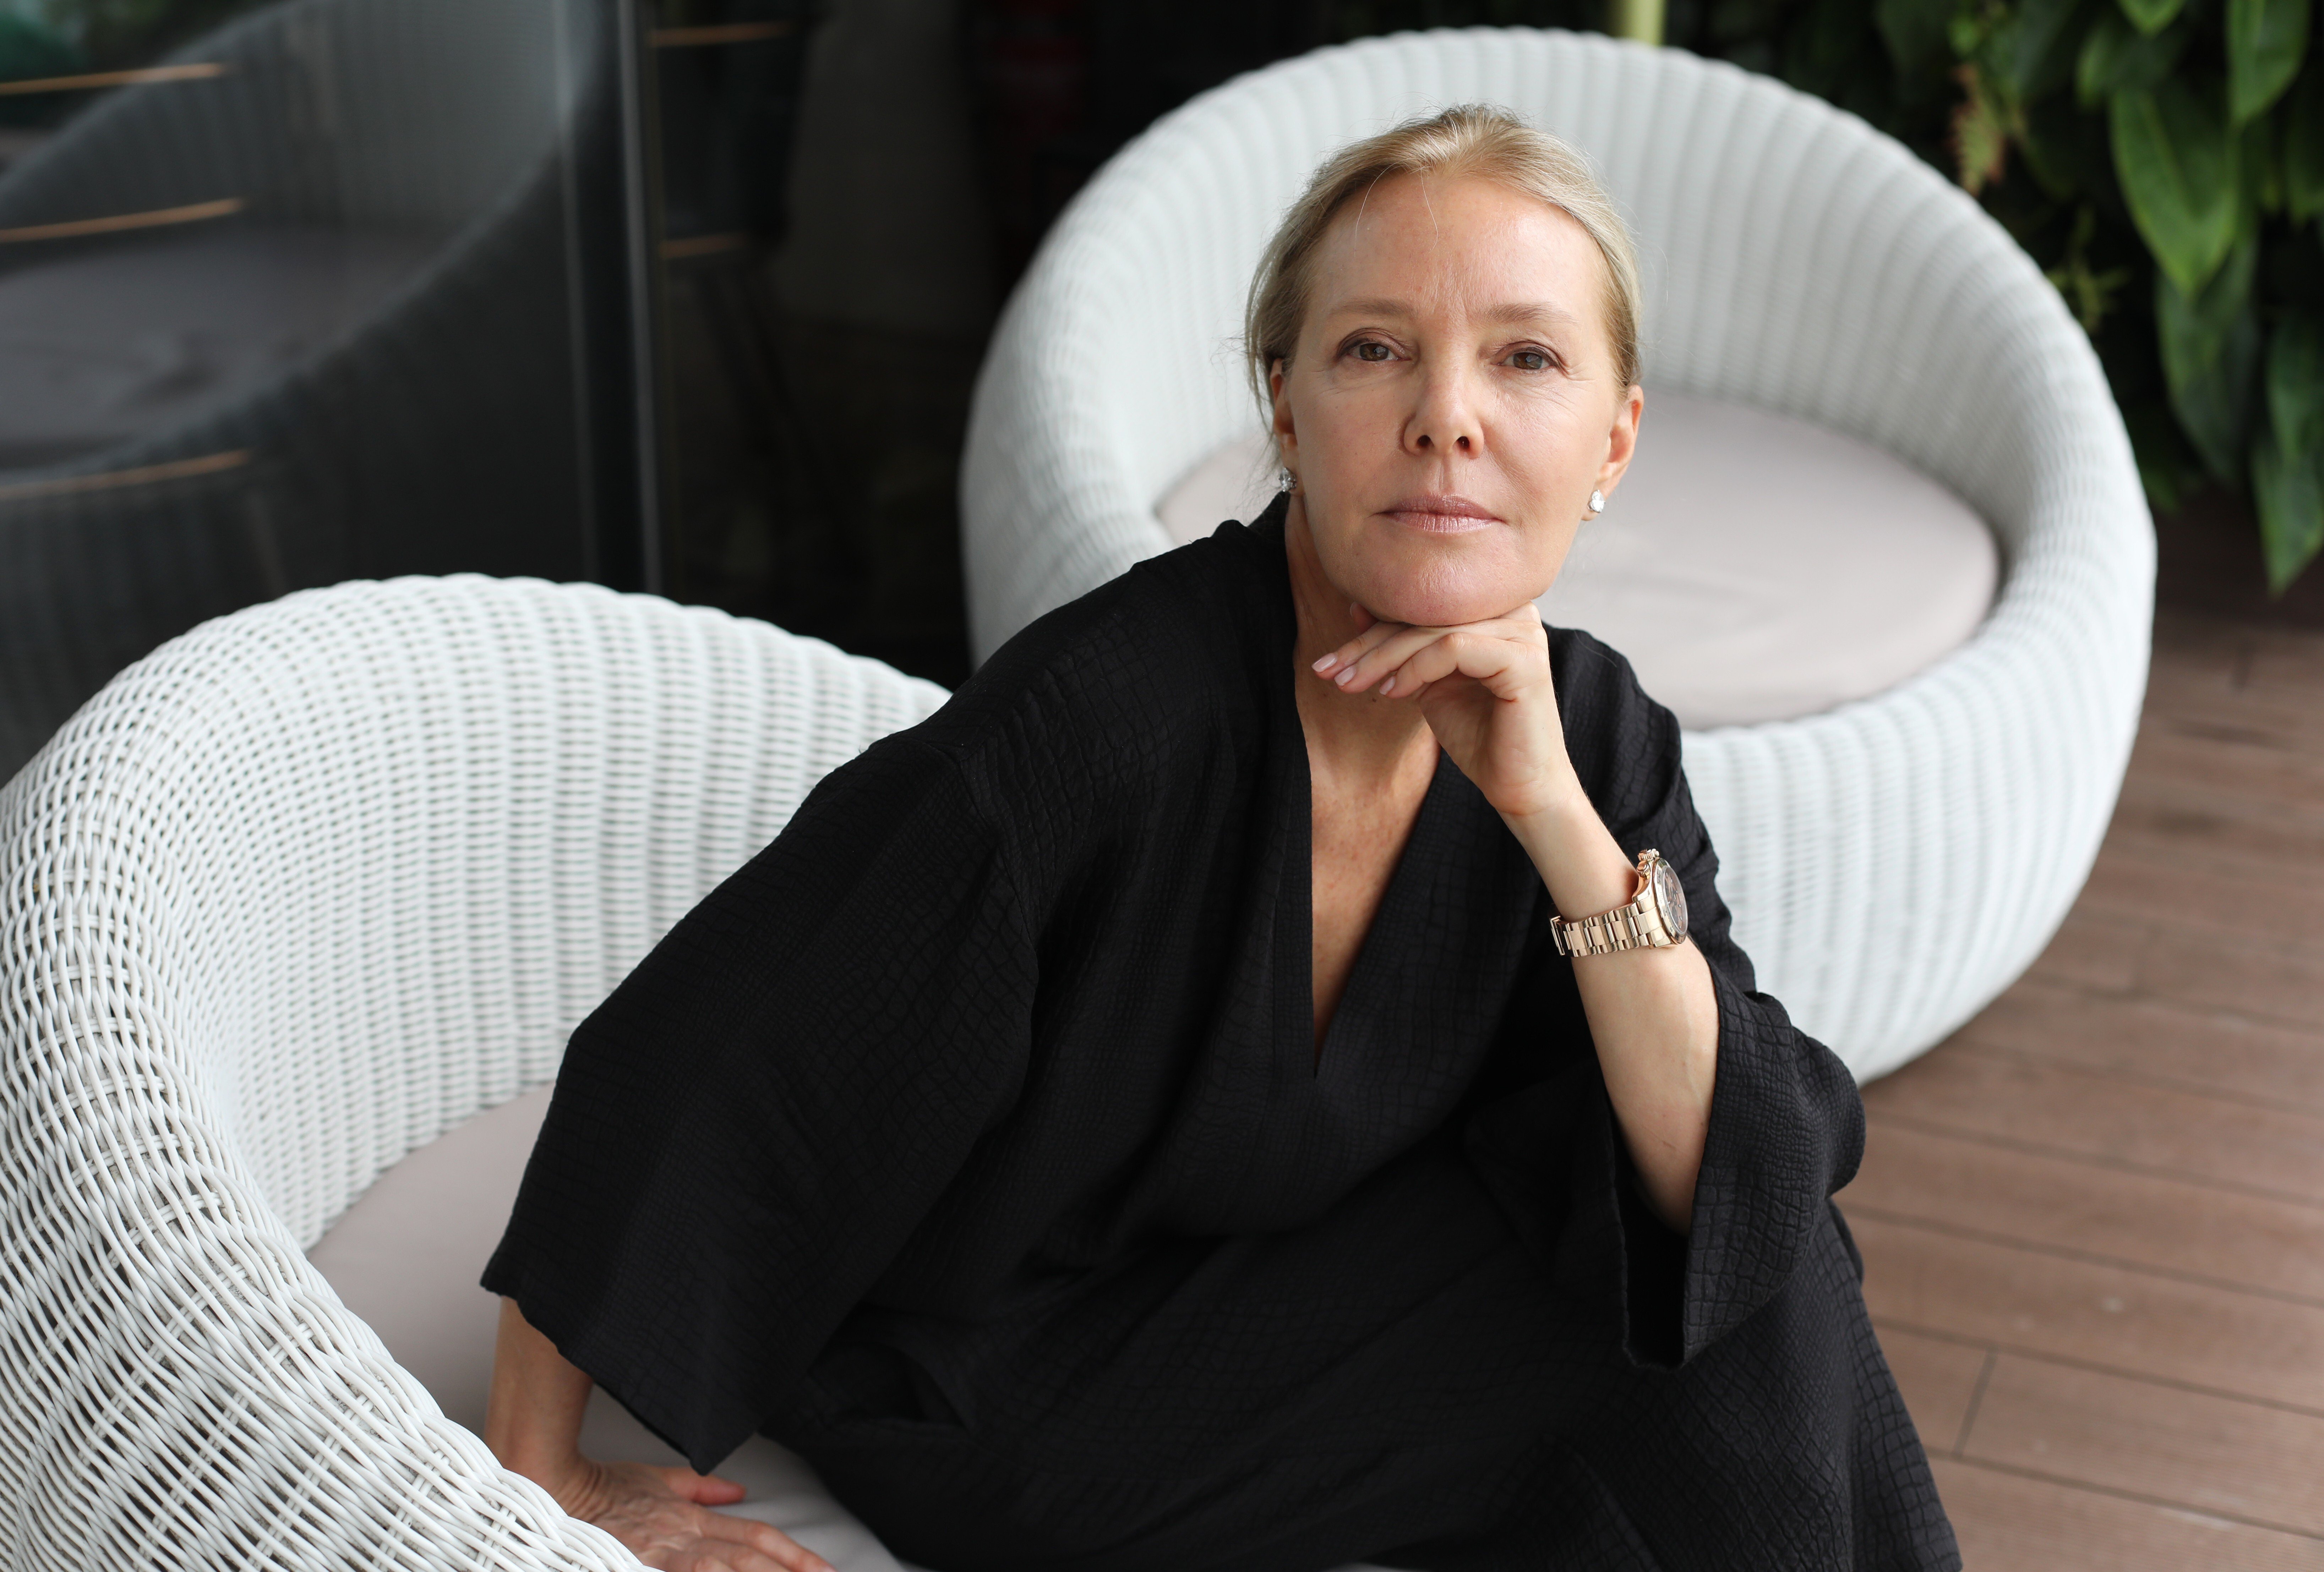 Designer Marie France Van Damme founded her eponymous clothing brand – originally a resort wear collection – in 2011. Photo: Chen Xiaomei